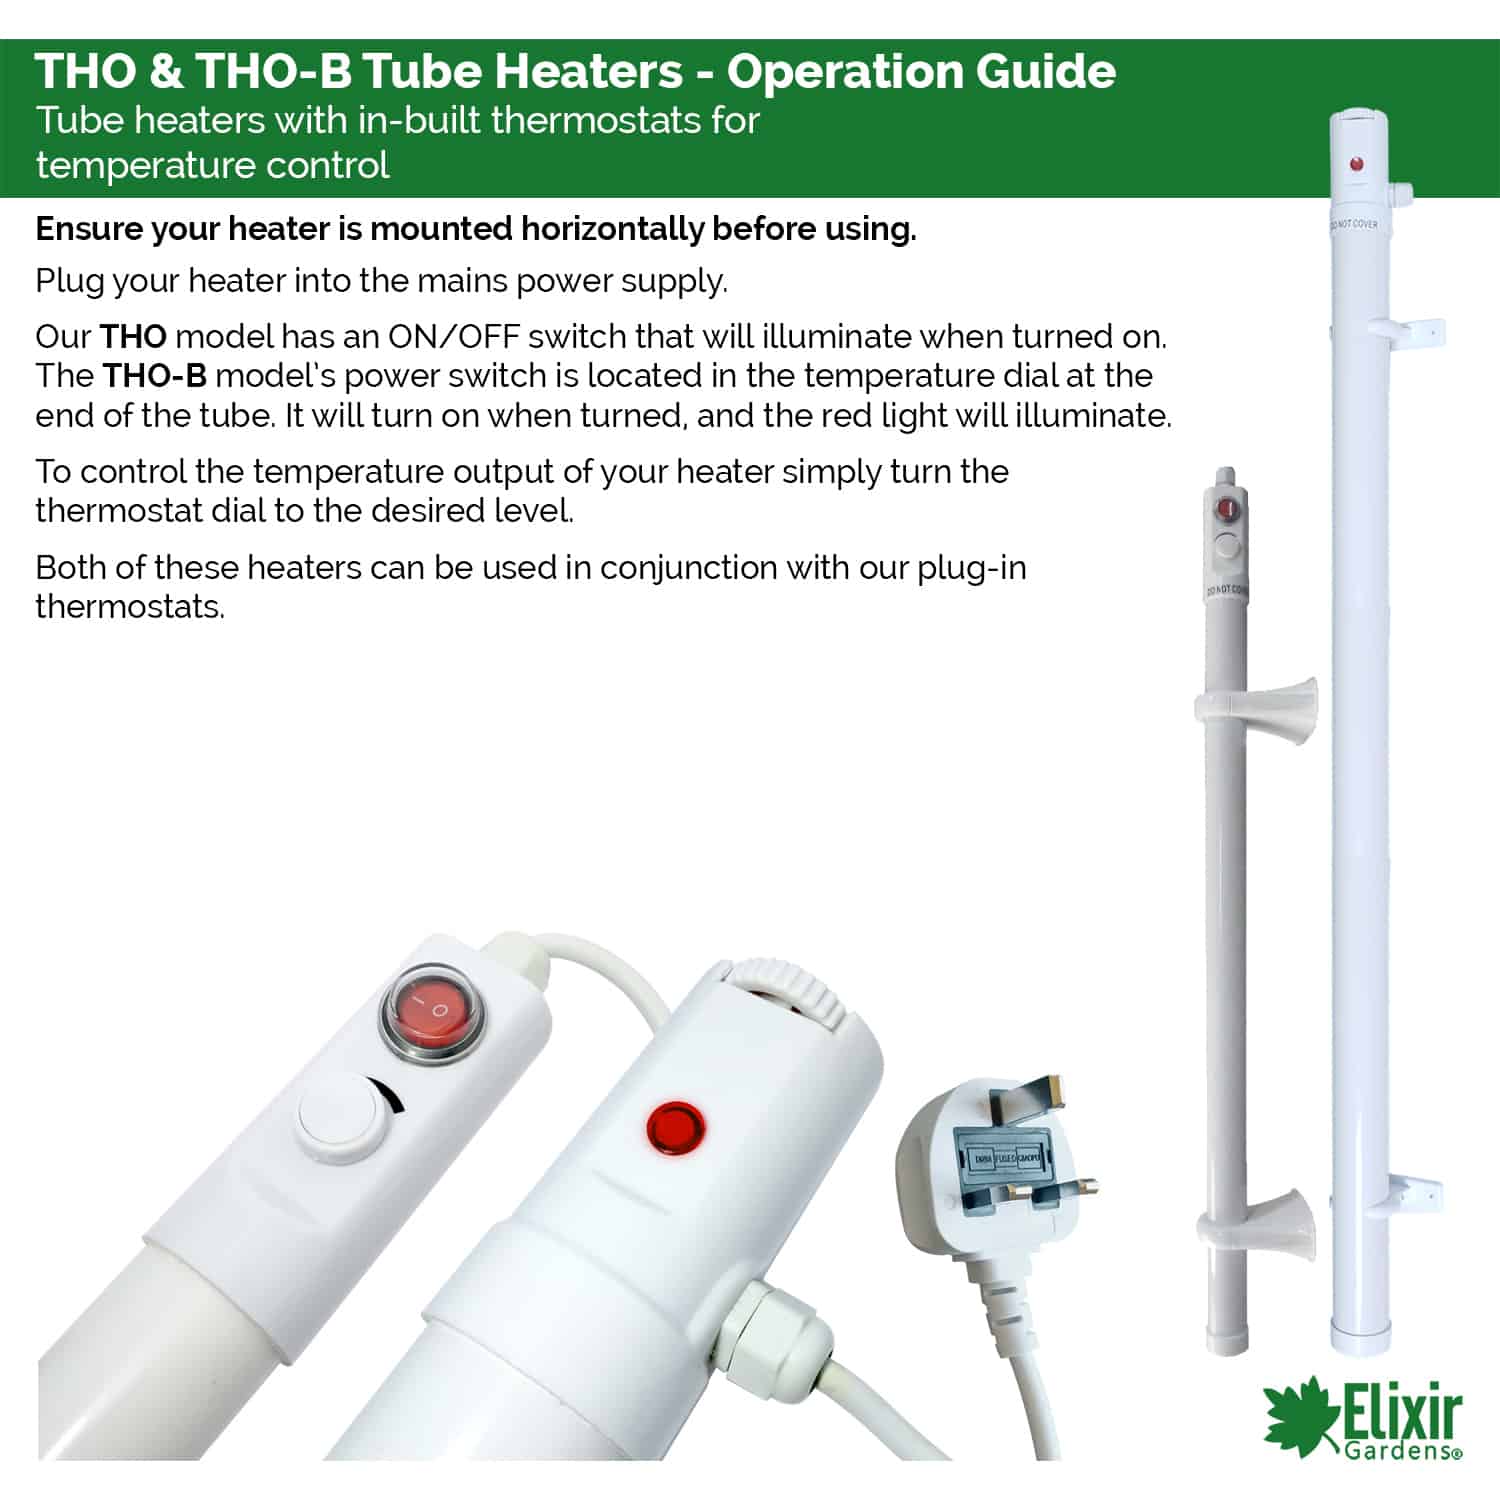 Elixir Gardens TH01 55W 50cm Tube Heater with Built in Adjustable Temperature Control